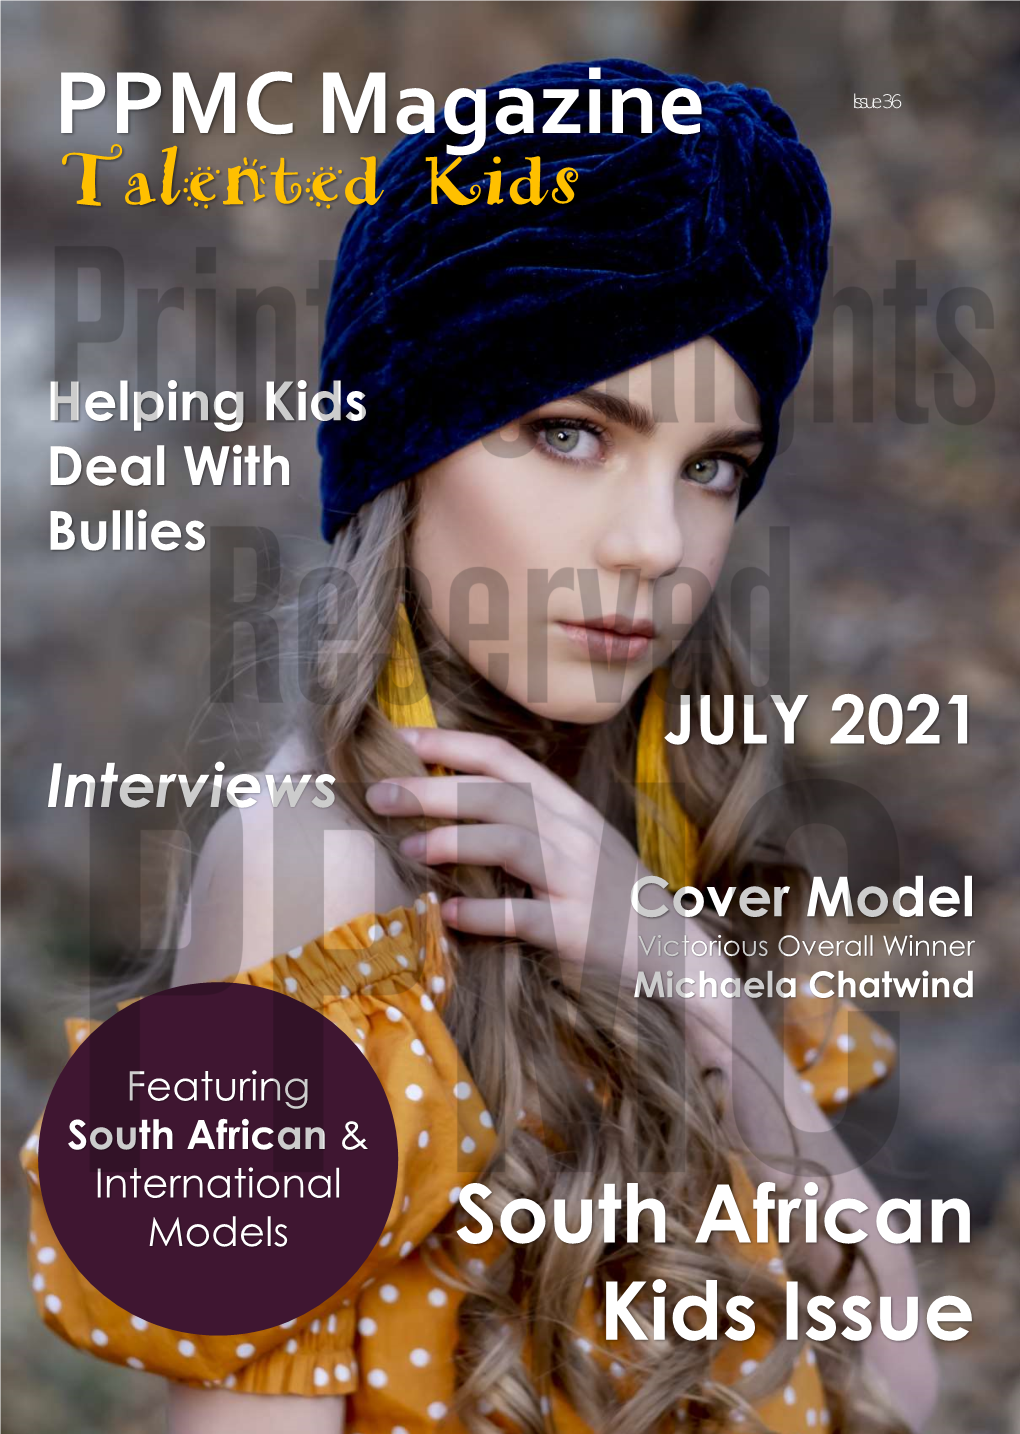 JULY 2021 Interviews Cover Model Victorious Overall Winner Michaela Chatwind